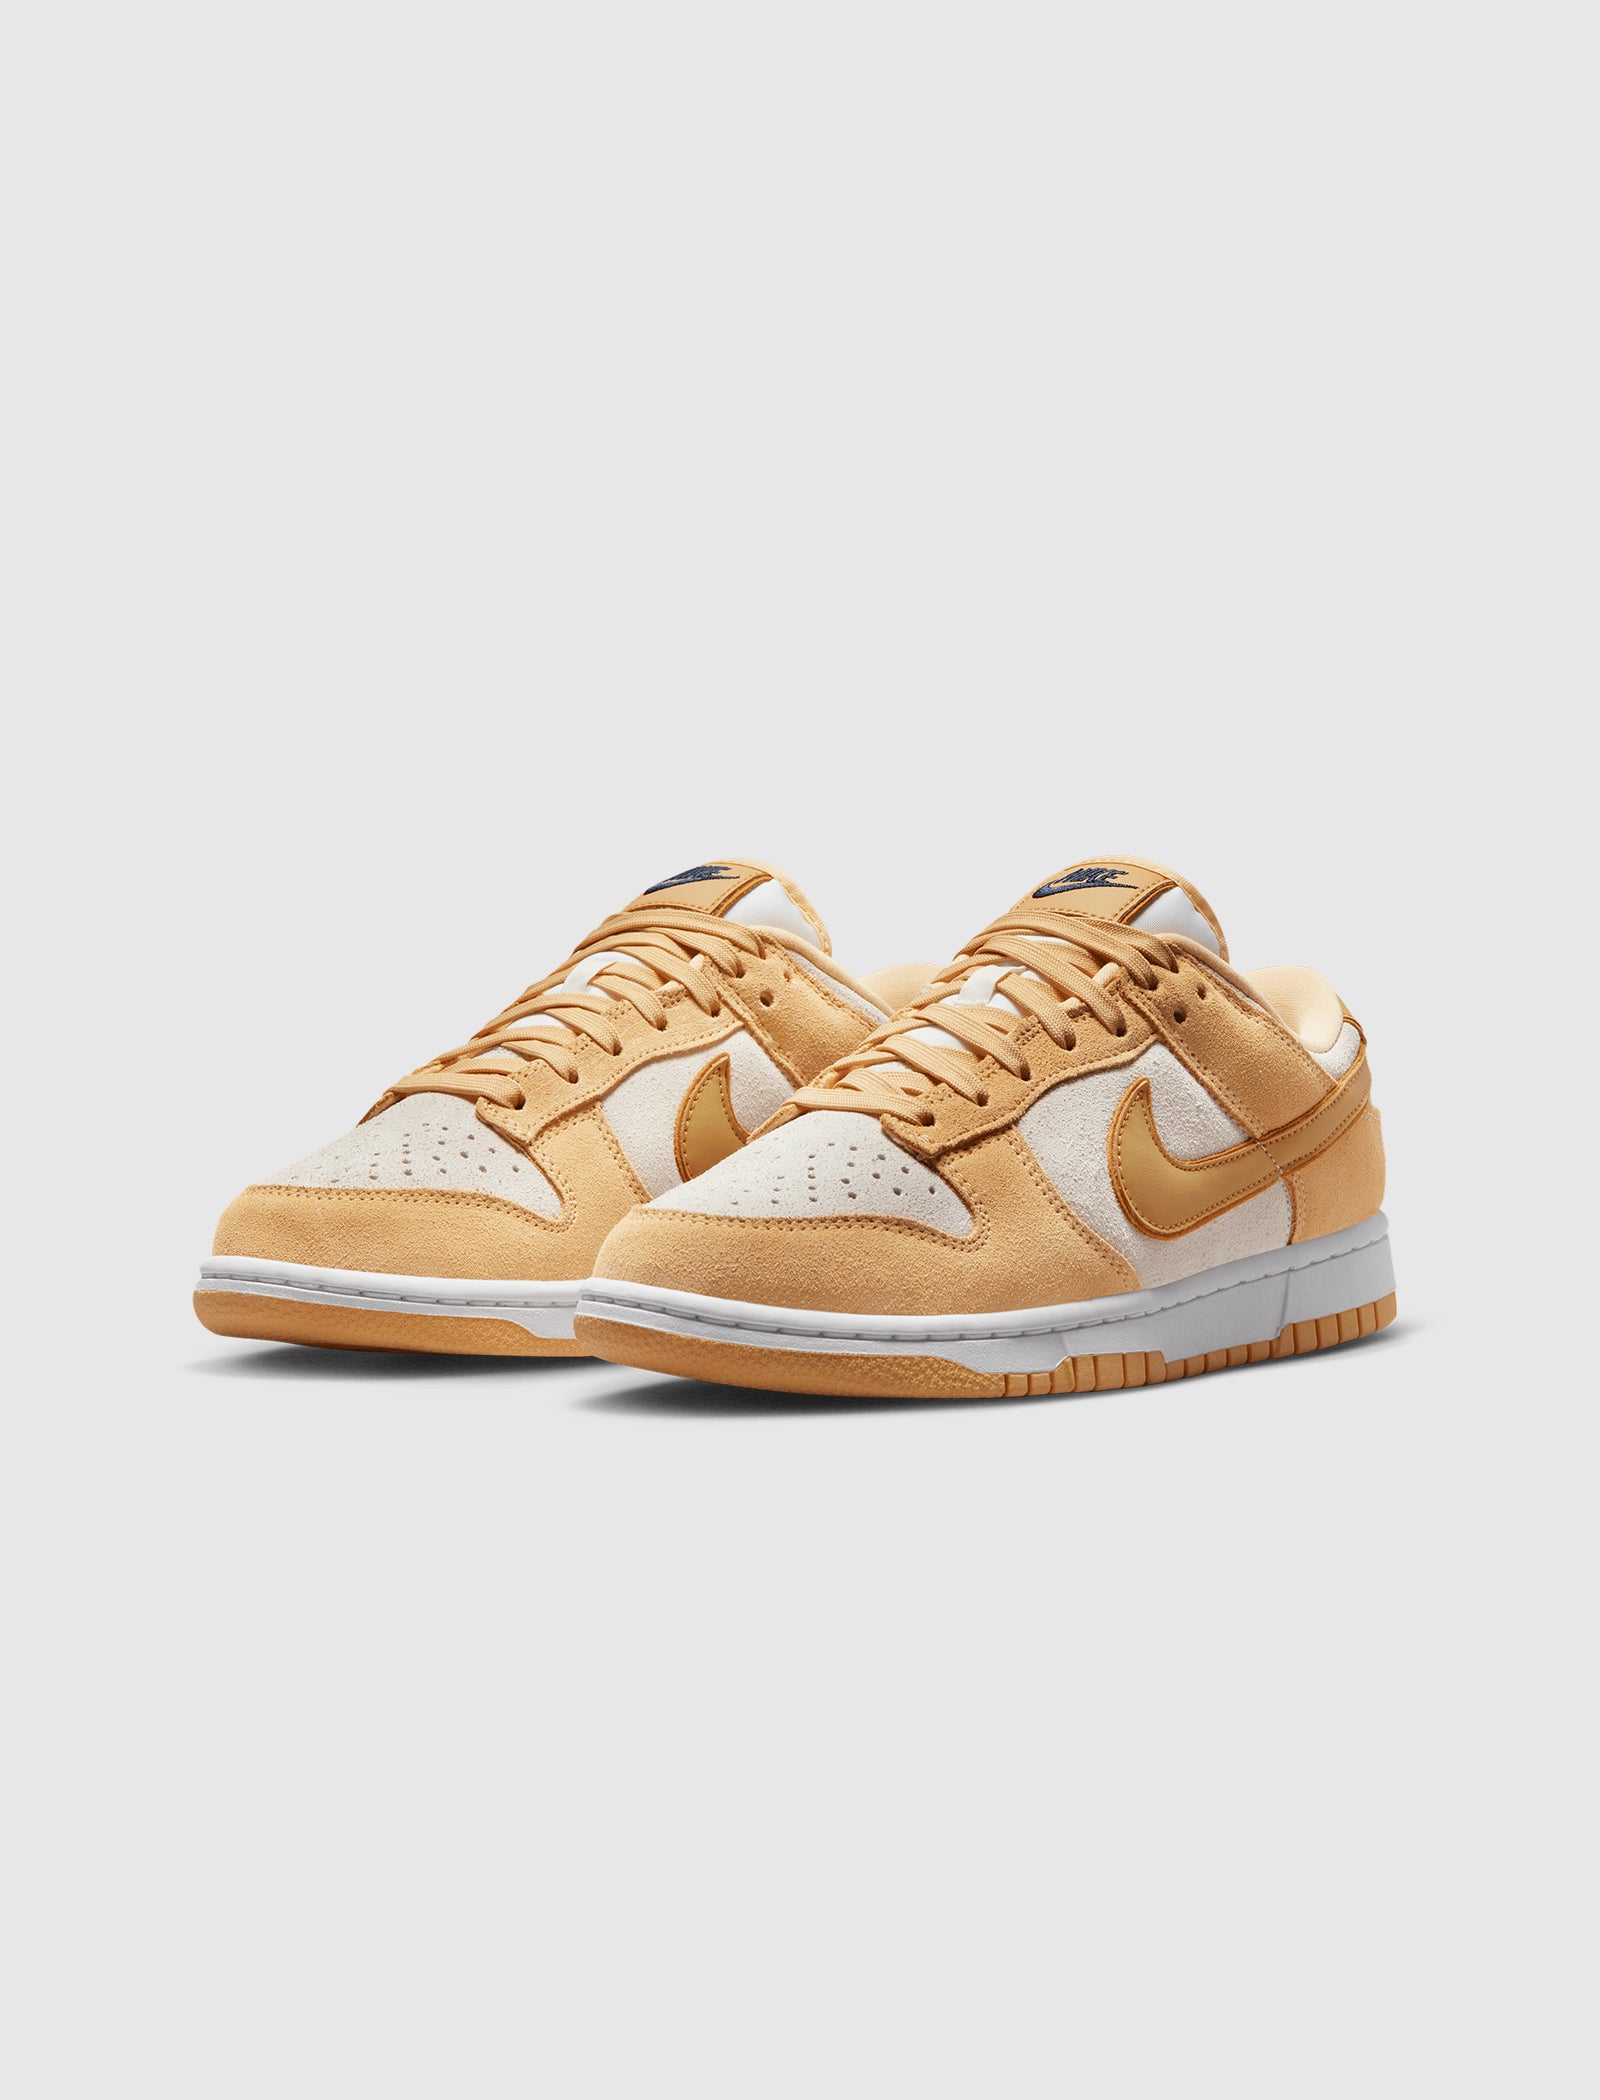 WOMEN'S DUNK LOW LX "GOLD SUEDE"